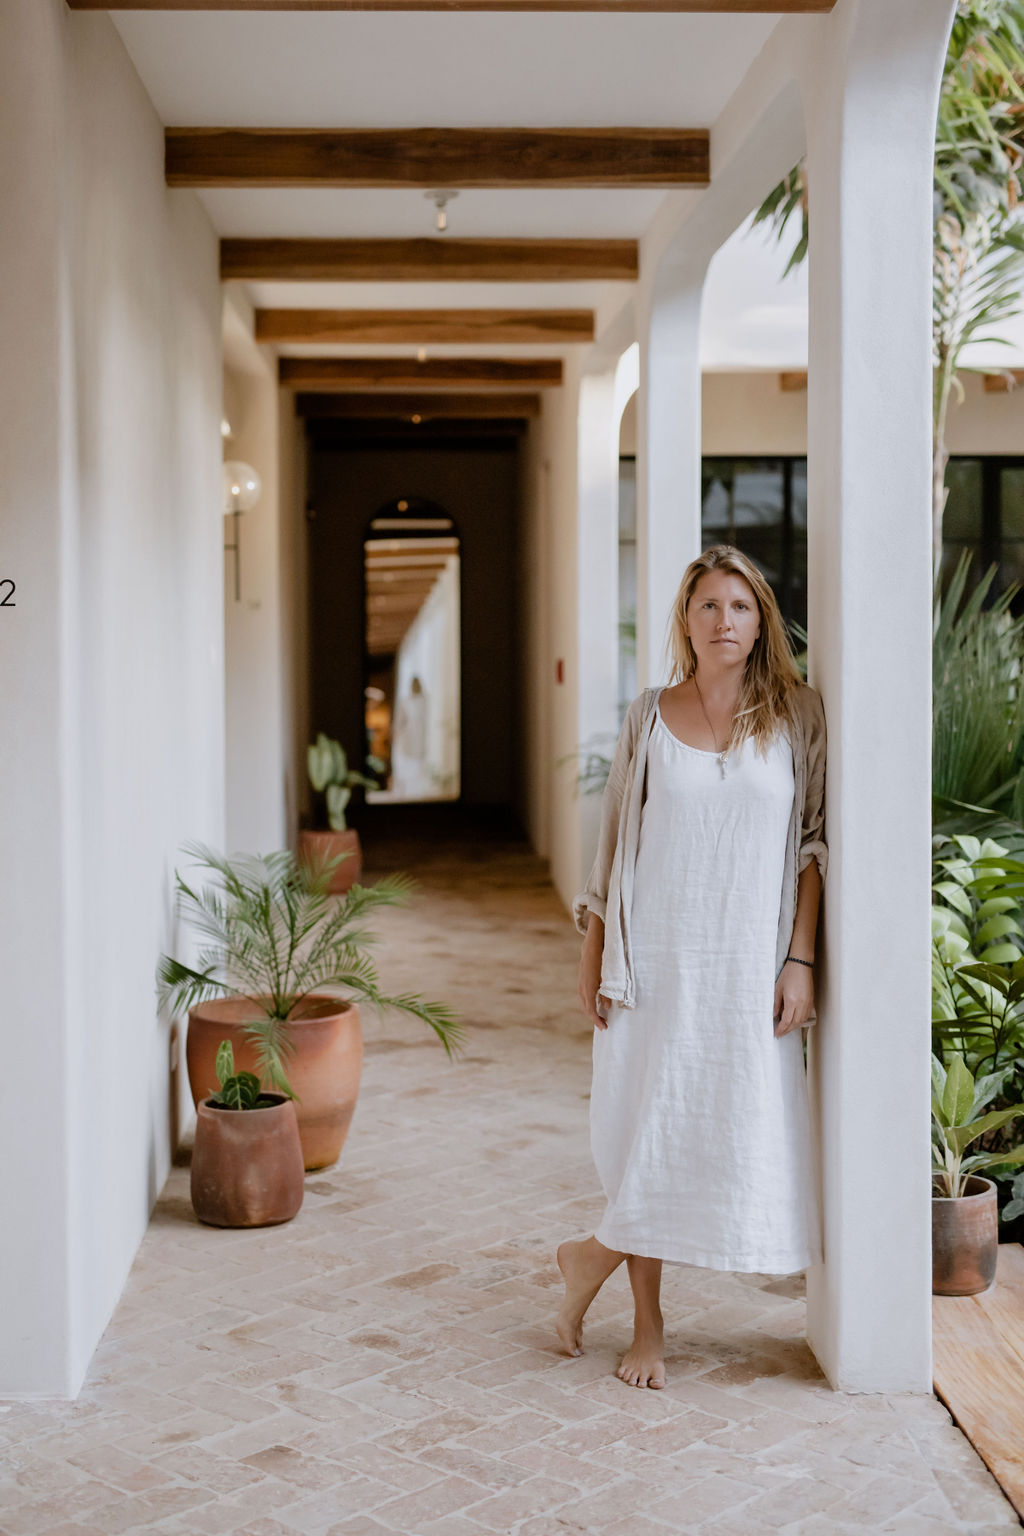 Photo of Stephanie Tannenbaum leaning against a white pillar in a serene outdoor hallway wearing a flow white dress and no shoes.